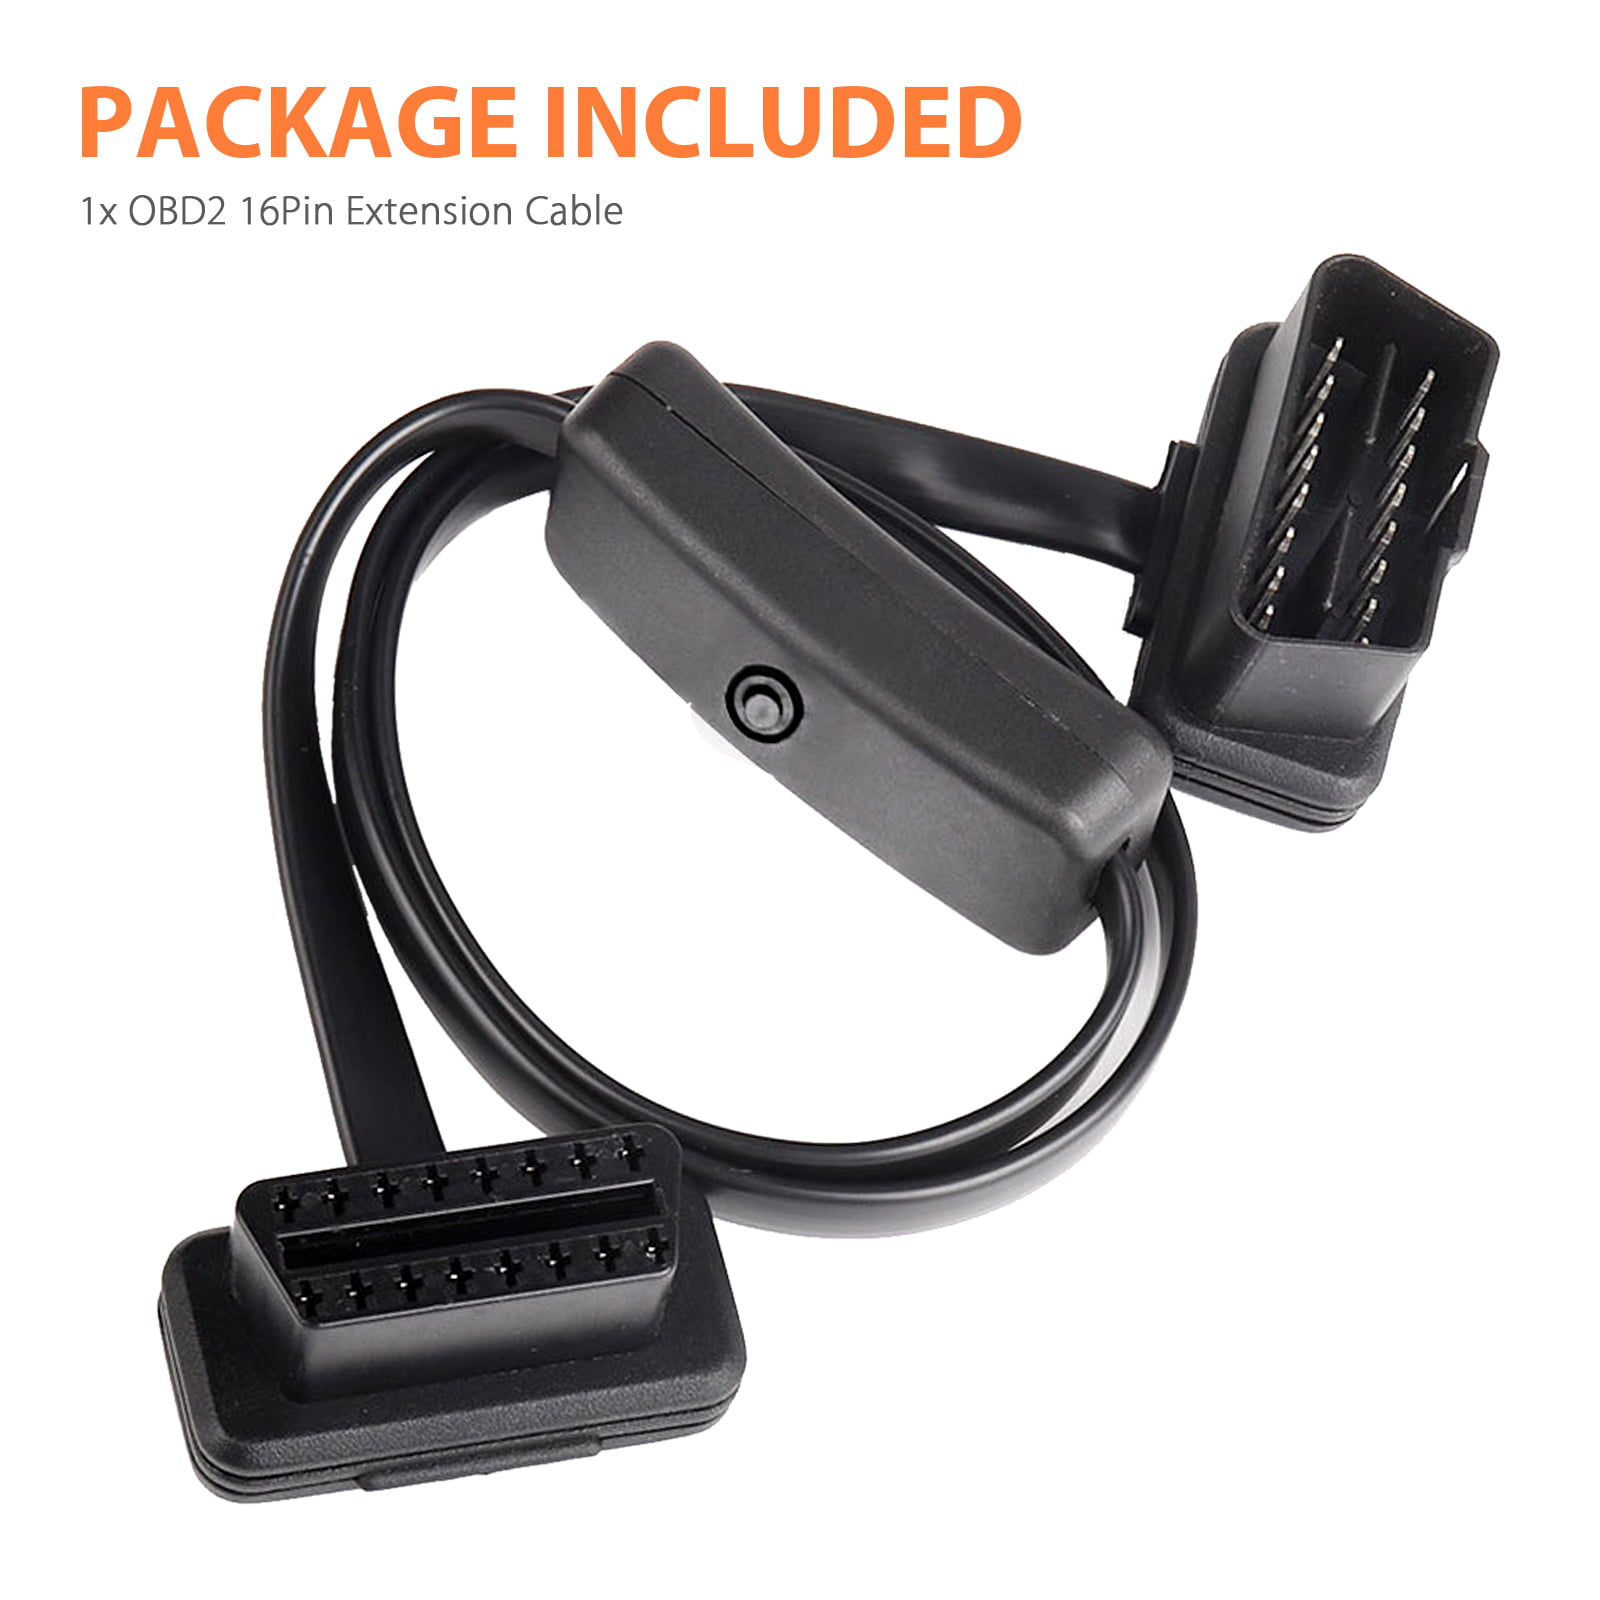 OBD2 OBDII 16 Pin M to F Extension Cable With Power Switch 